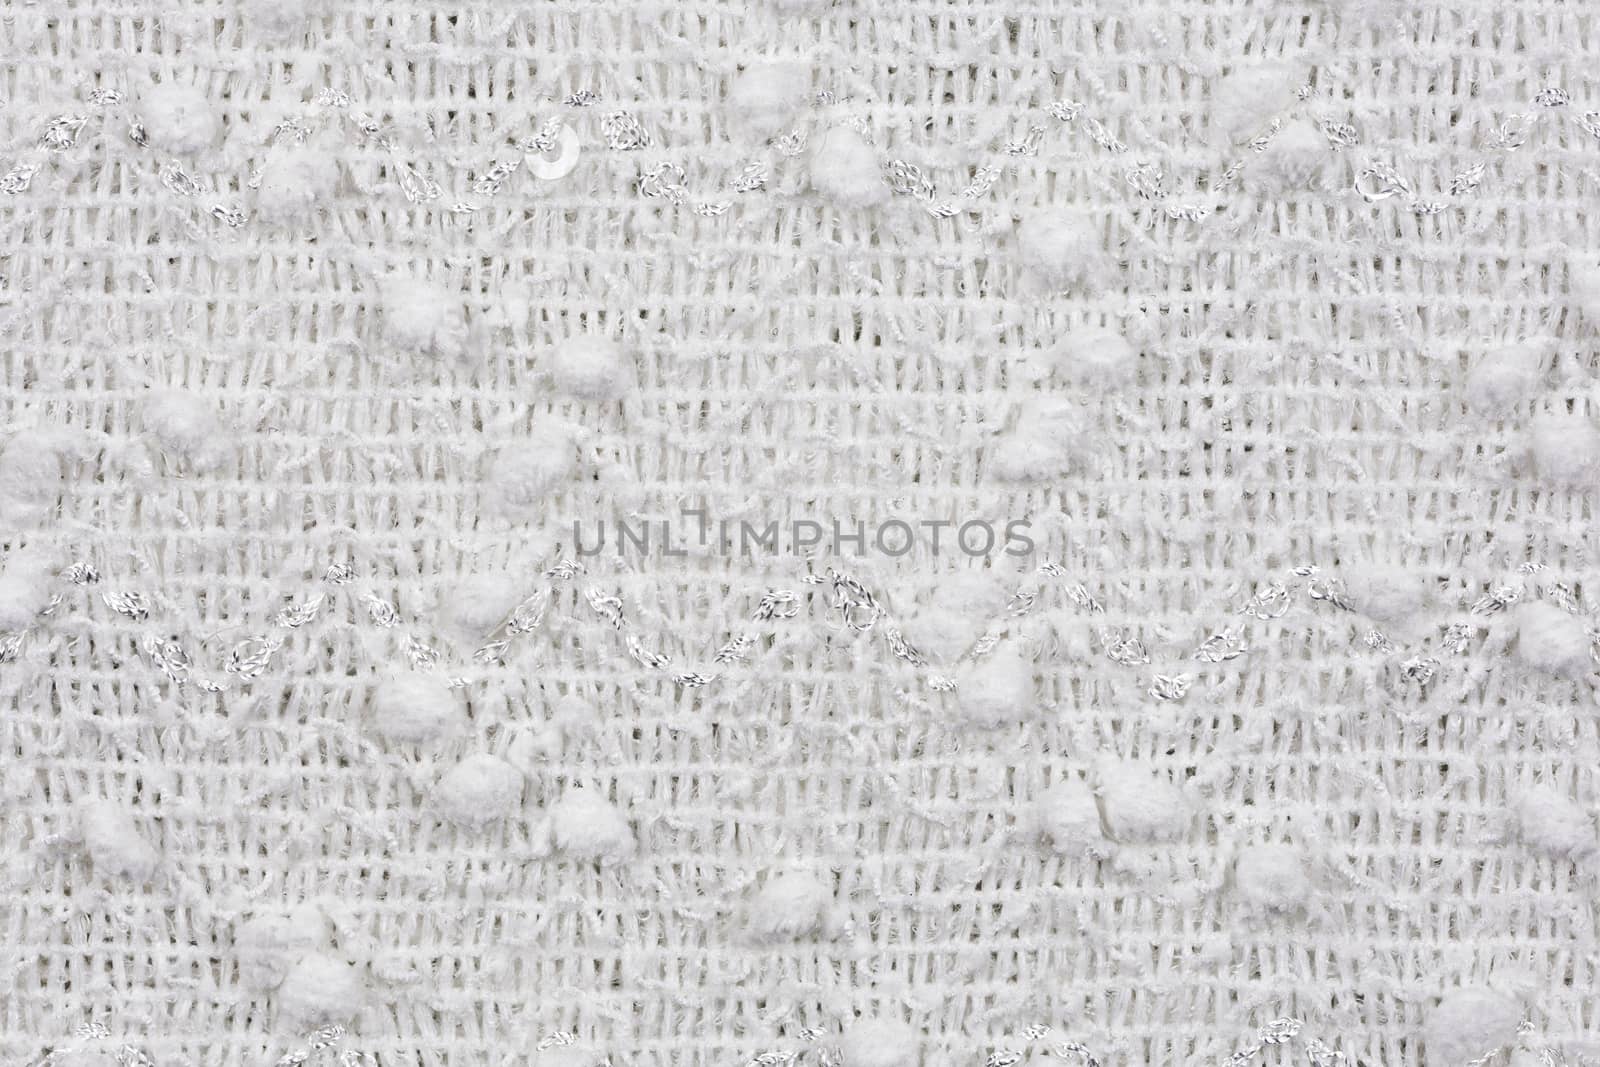 White fabric with patterns, a background or texture